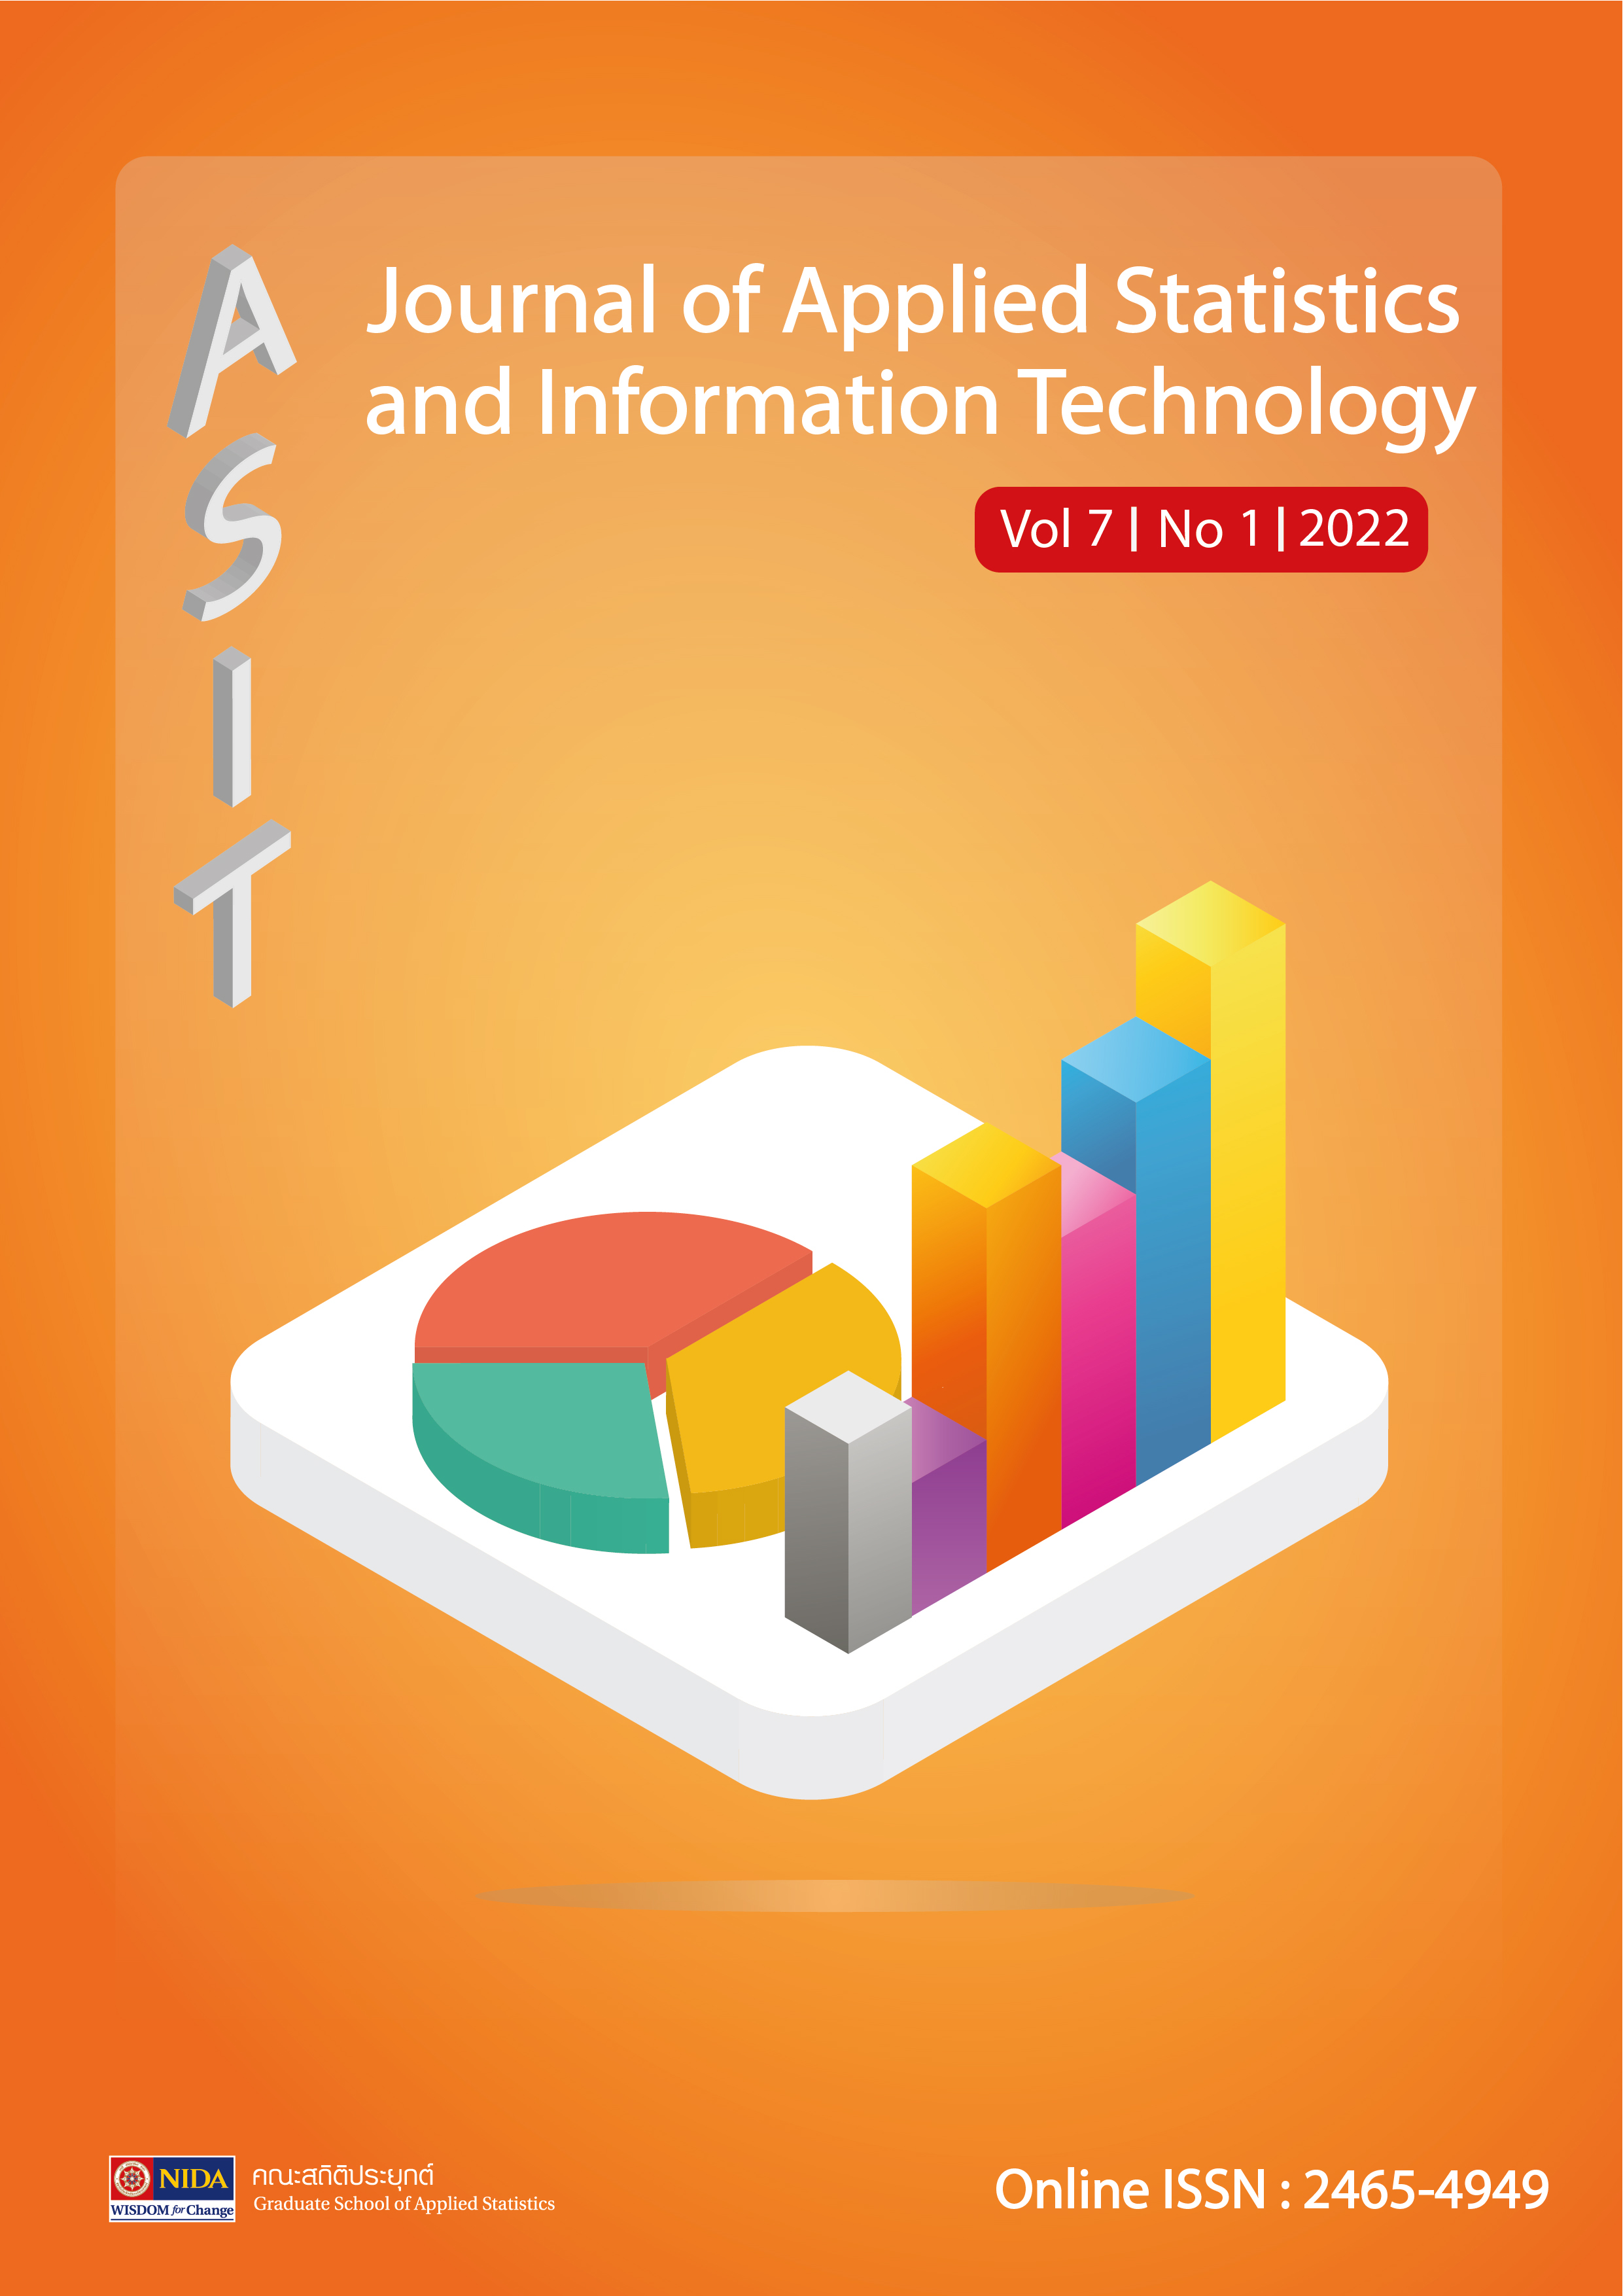 					View Vol. 7 No. 1 (2022): Journal of Applied Statistics and Information Technology Vol 7 No 1 (January - June 2022)
				